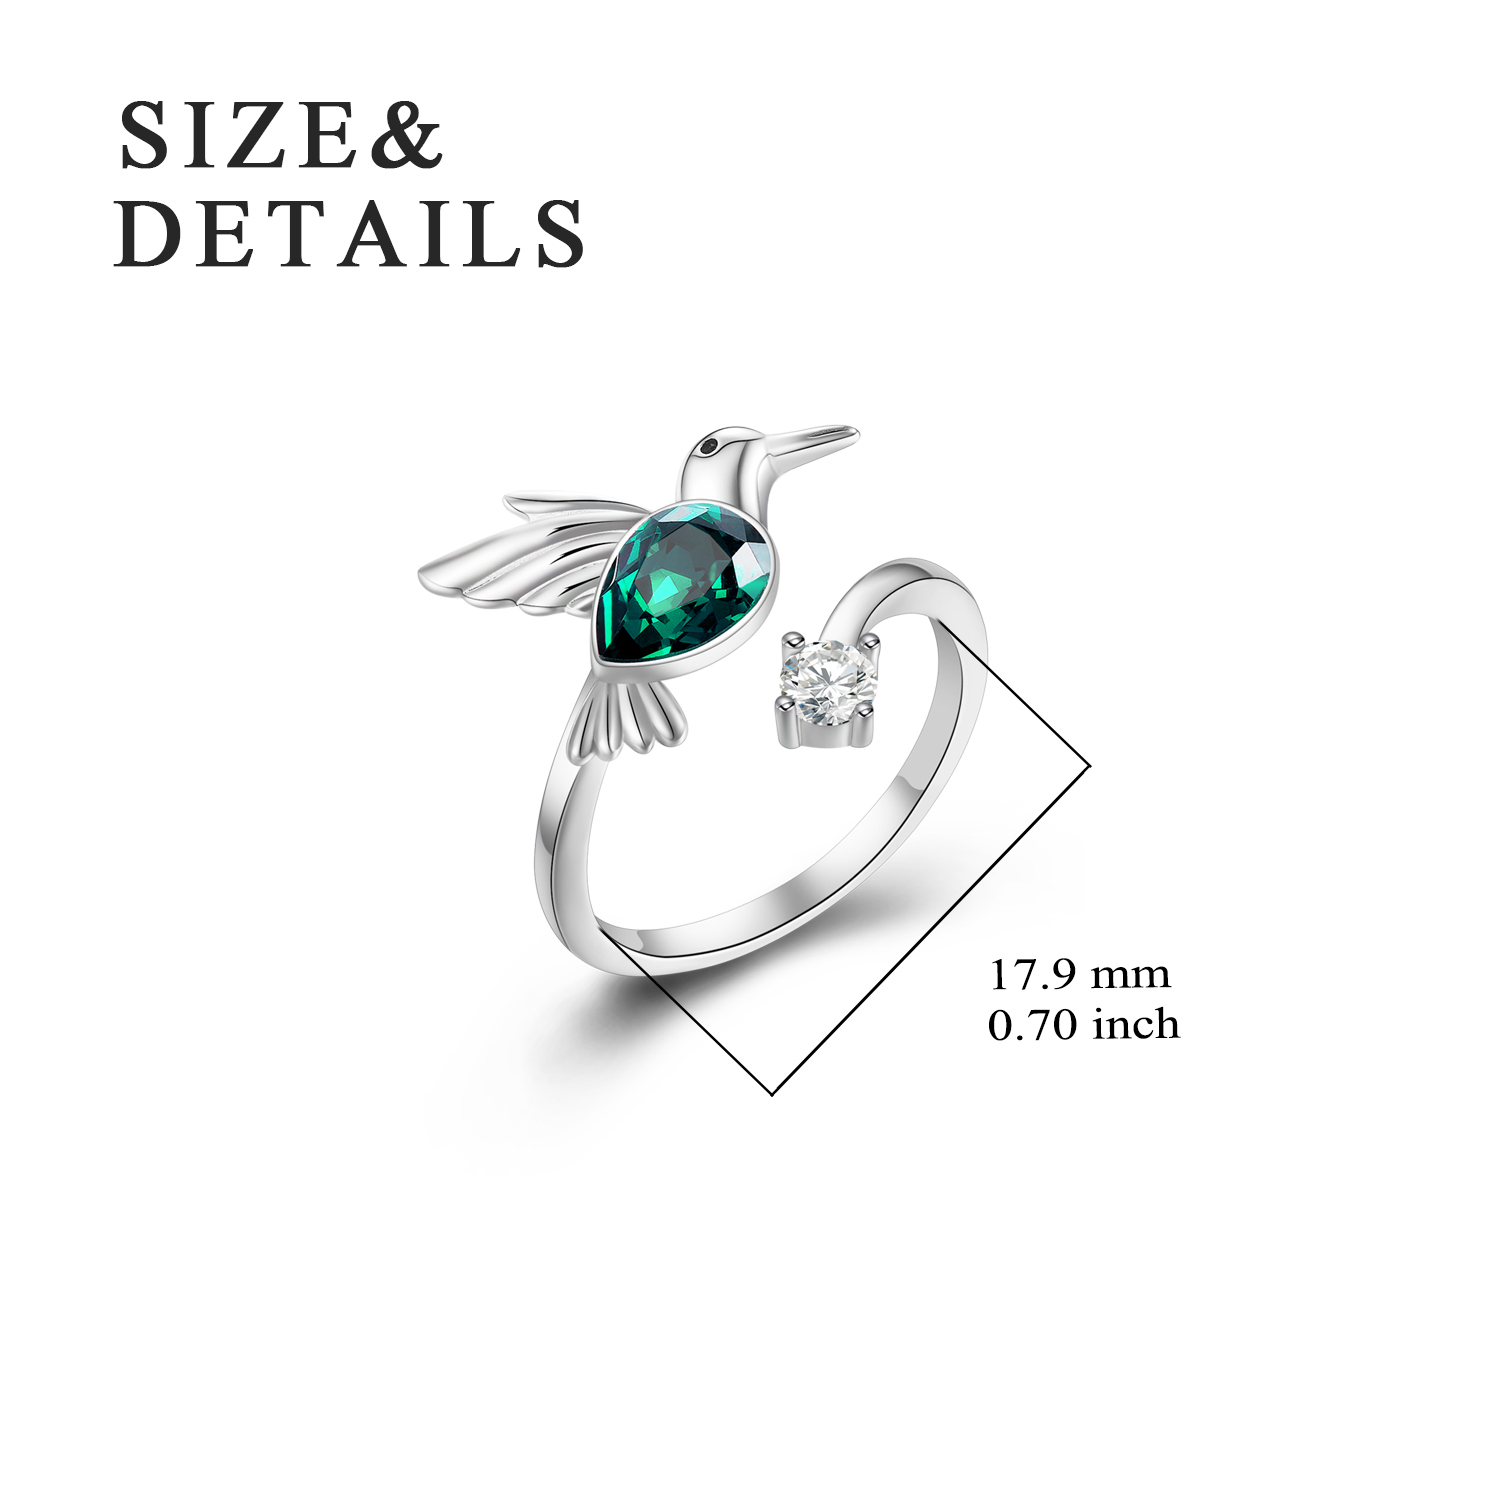 Emerald Green May Birthstone Crystal Ring for Mom Birthday, Sterling Silver Hummingbird Womens Ring Jewelry Gifts